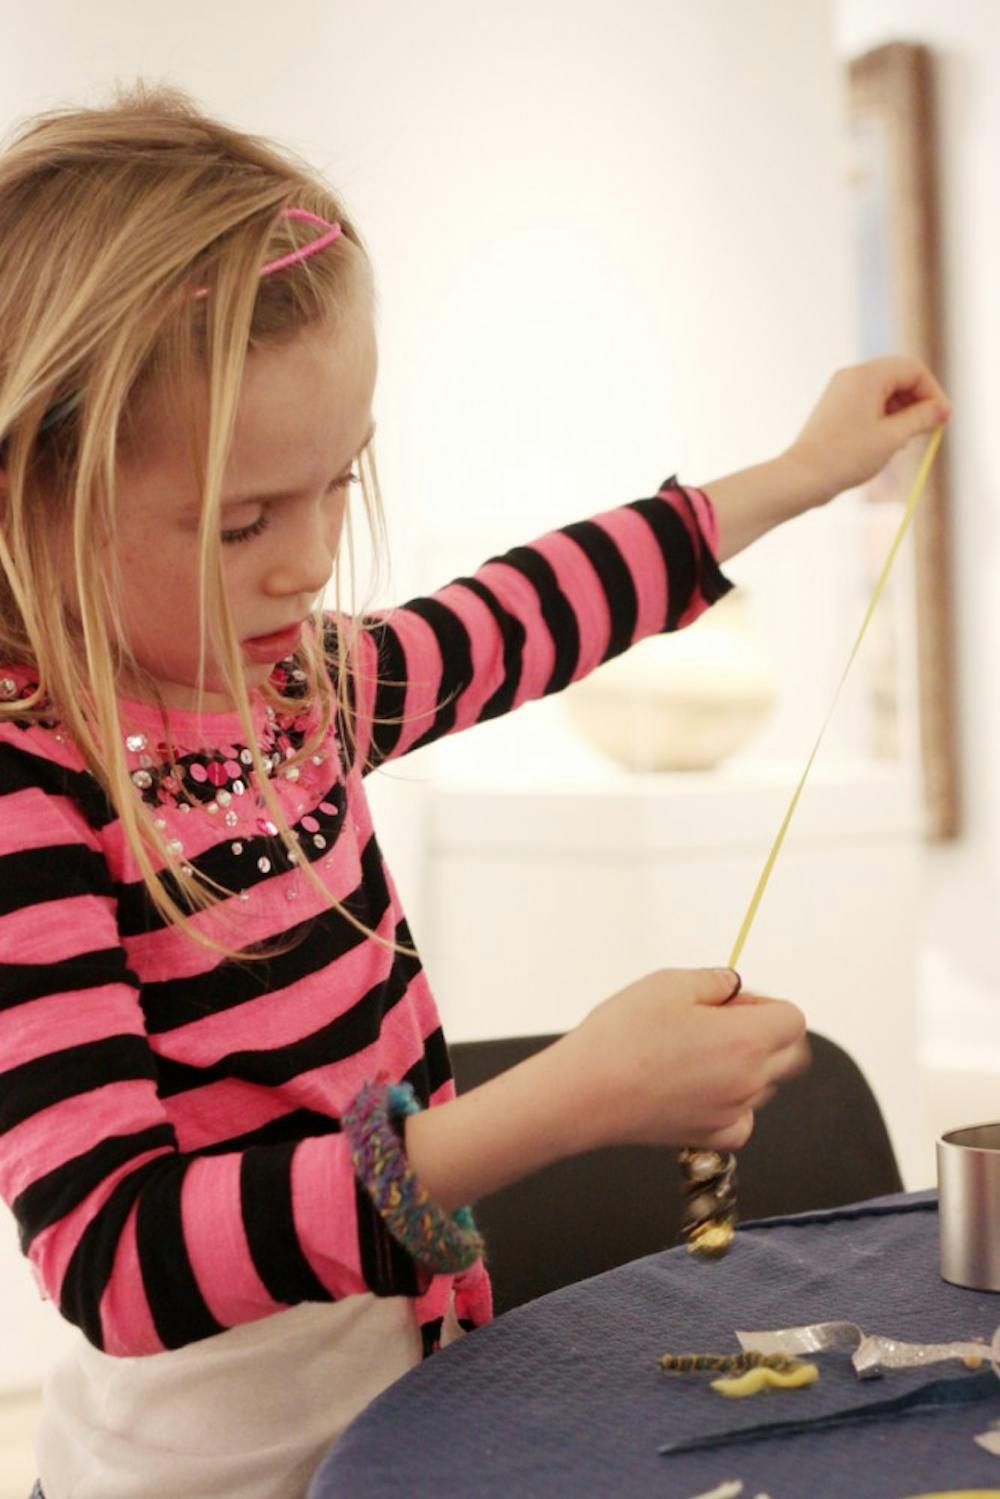 The Ackland Art Museum hosted a Winter Pajama Party on Saturday from 2-5 pm.  Children came in their pajamas and participated in story time, costume dress up, and arts and crafts activities.  Flora Ulrich, 7, makes a bracelet  at the event. 